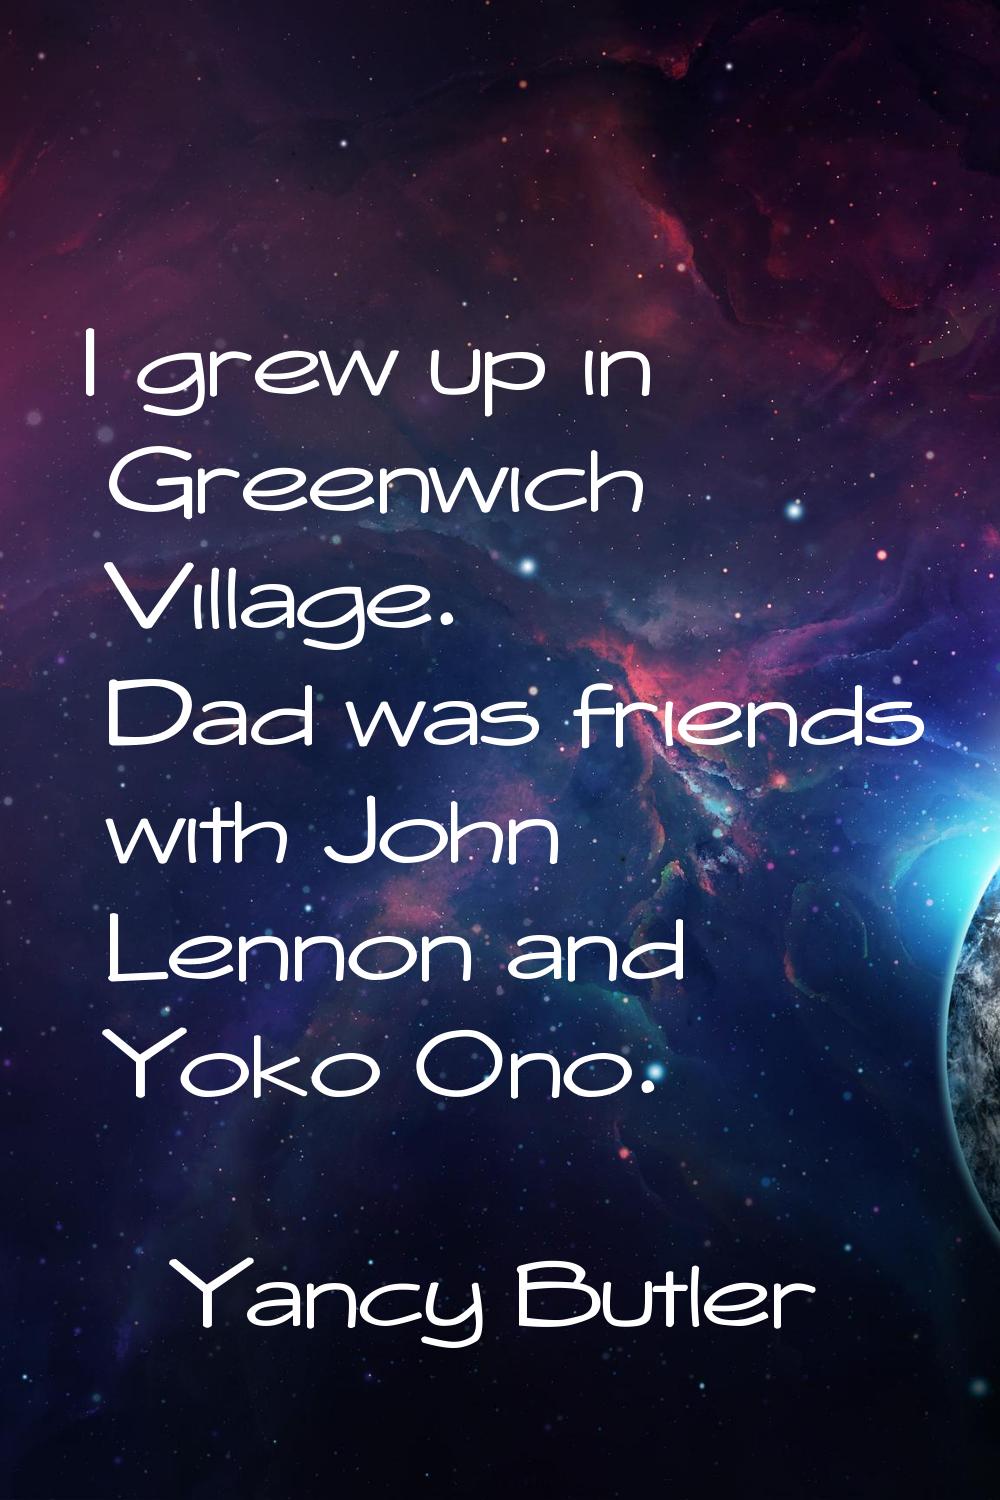 I grew up in Greenwich Village. Dad was friends with John Lennon and Yoko Ono.